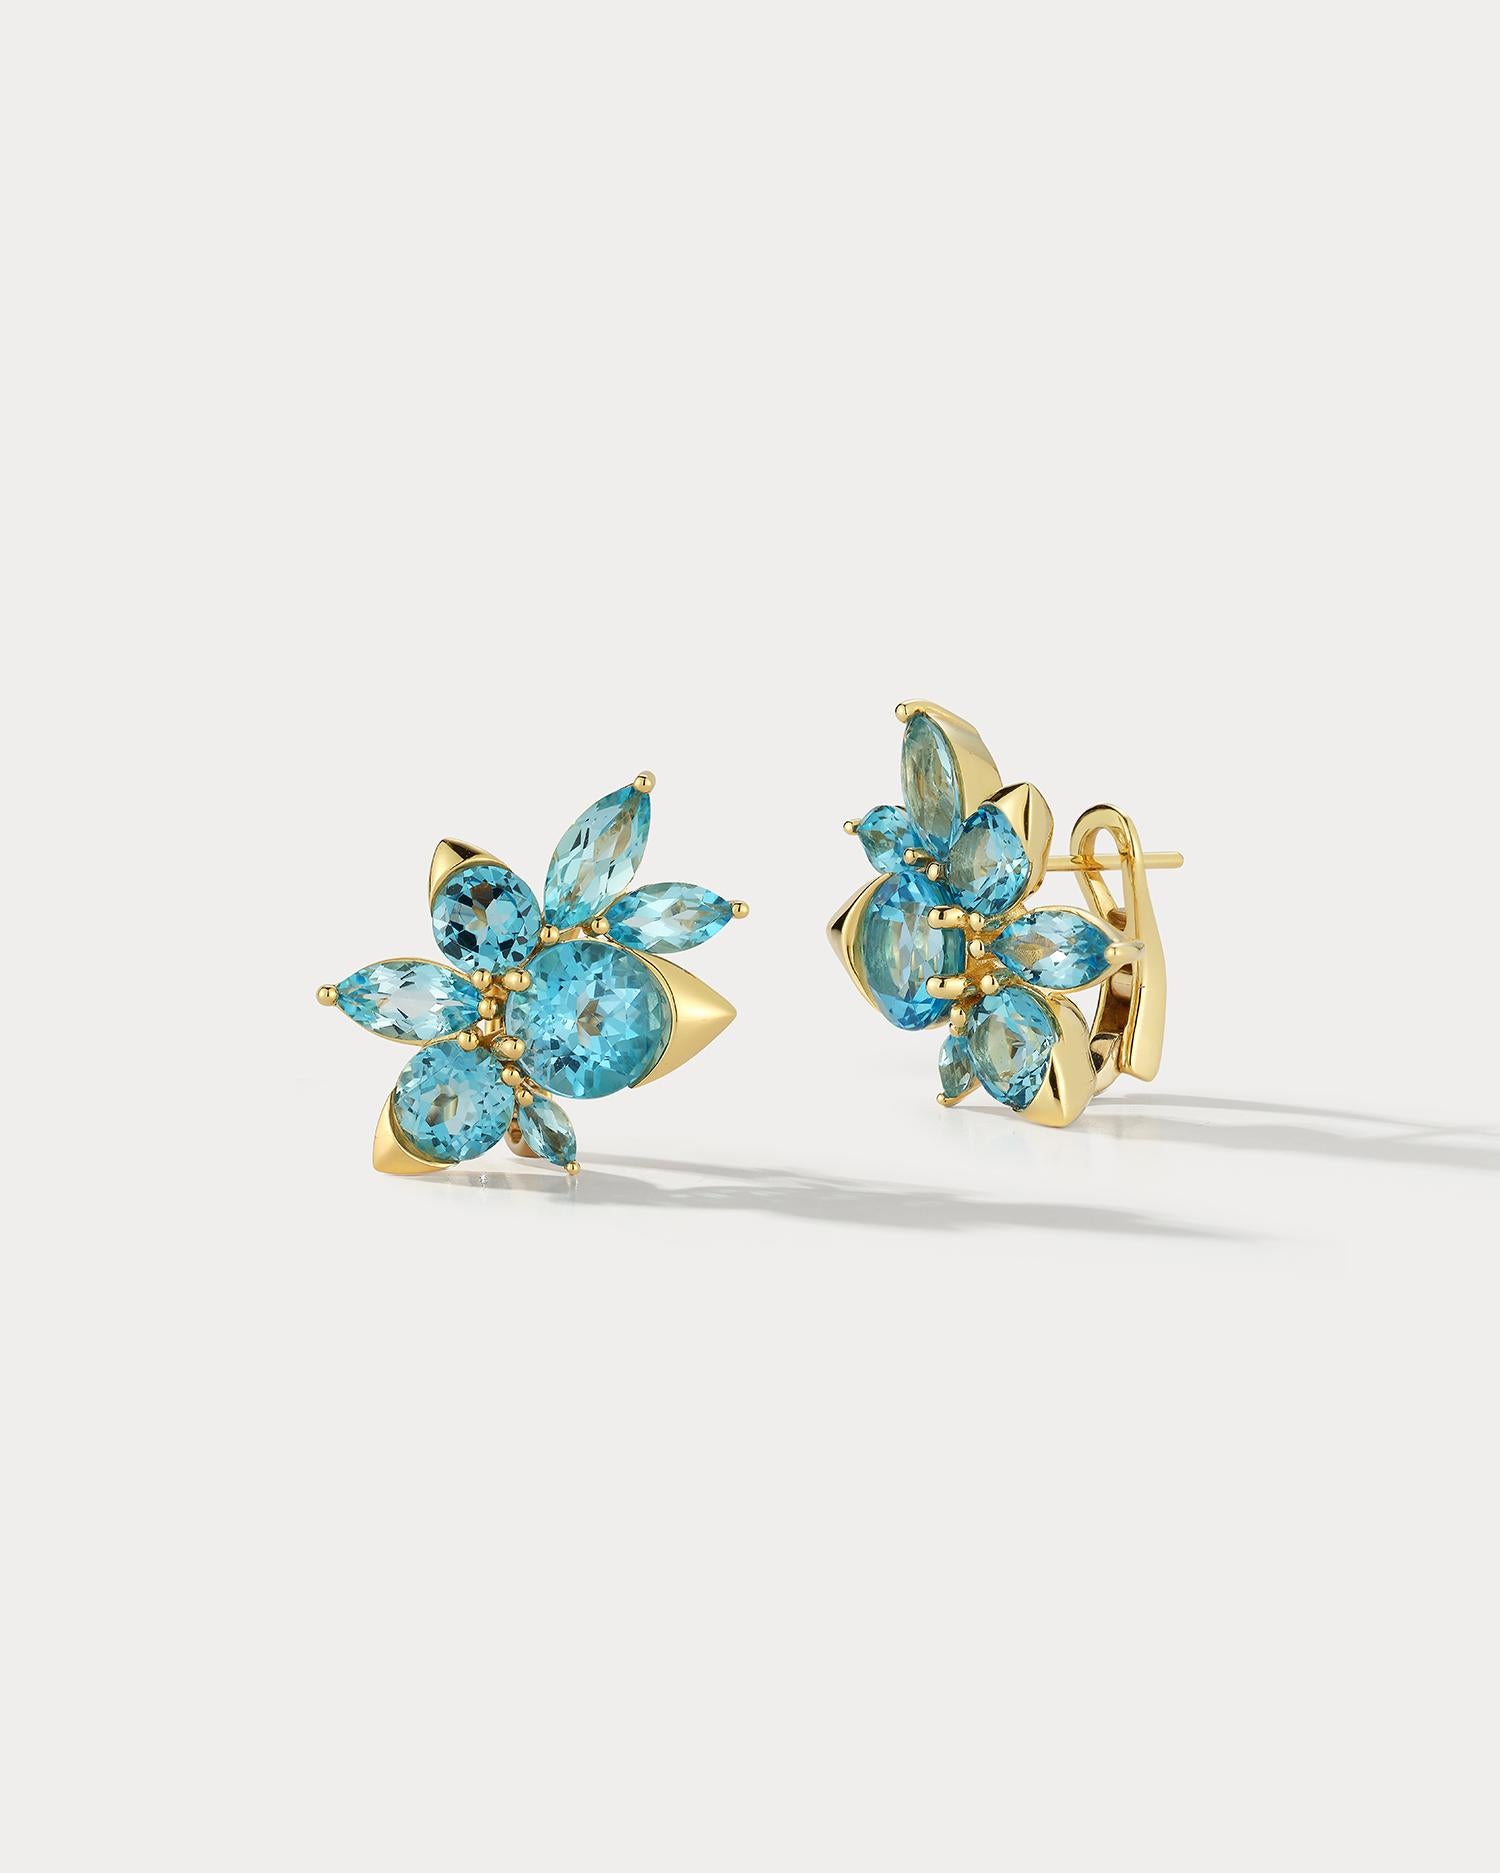 These 18K yellow gold earrings feature a cluster of dazzling blue topaz stones that sparkle in the light. Each stone is expertly prong or bezel set, adding to the overall elegance of the design. The yellow gold provides a warm and inviting contrast